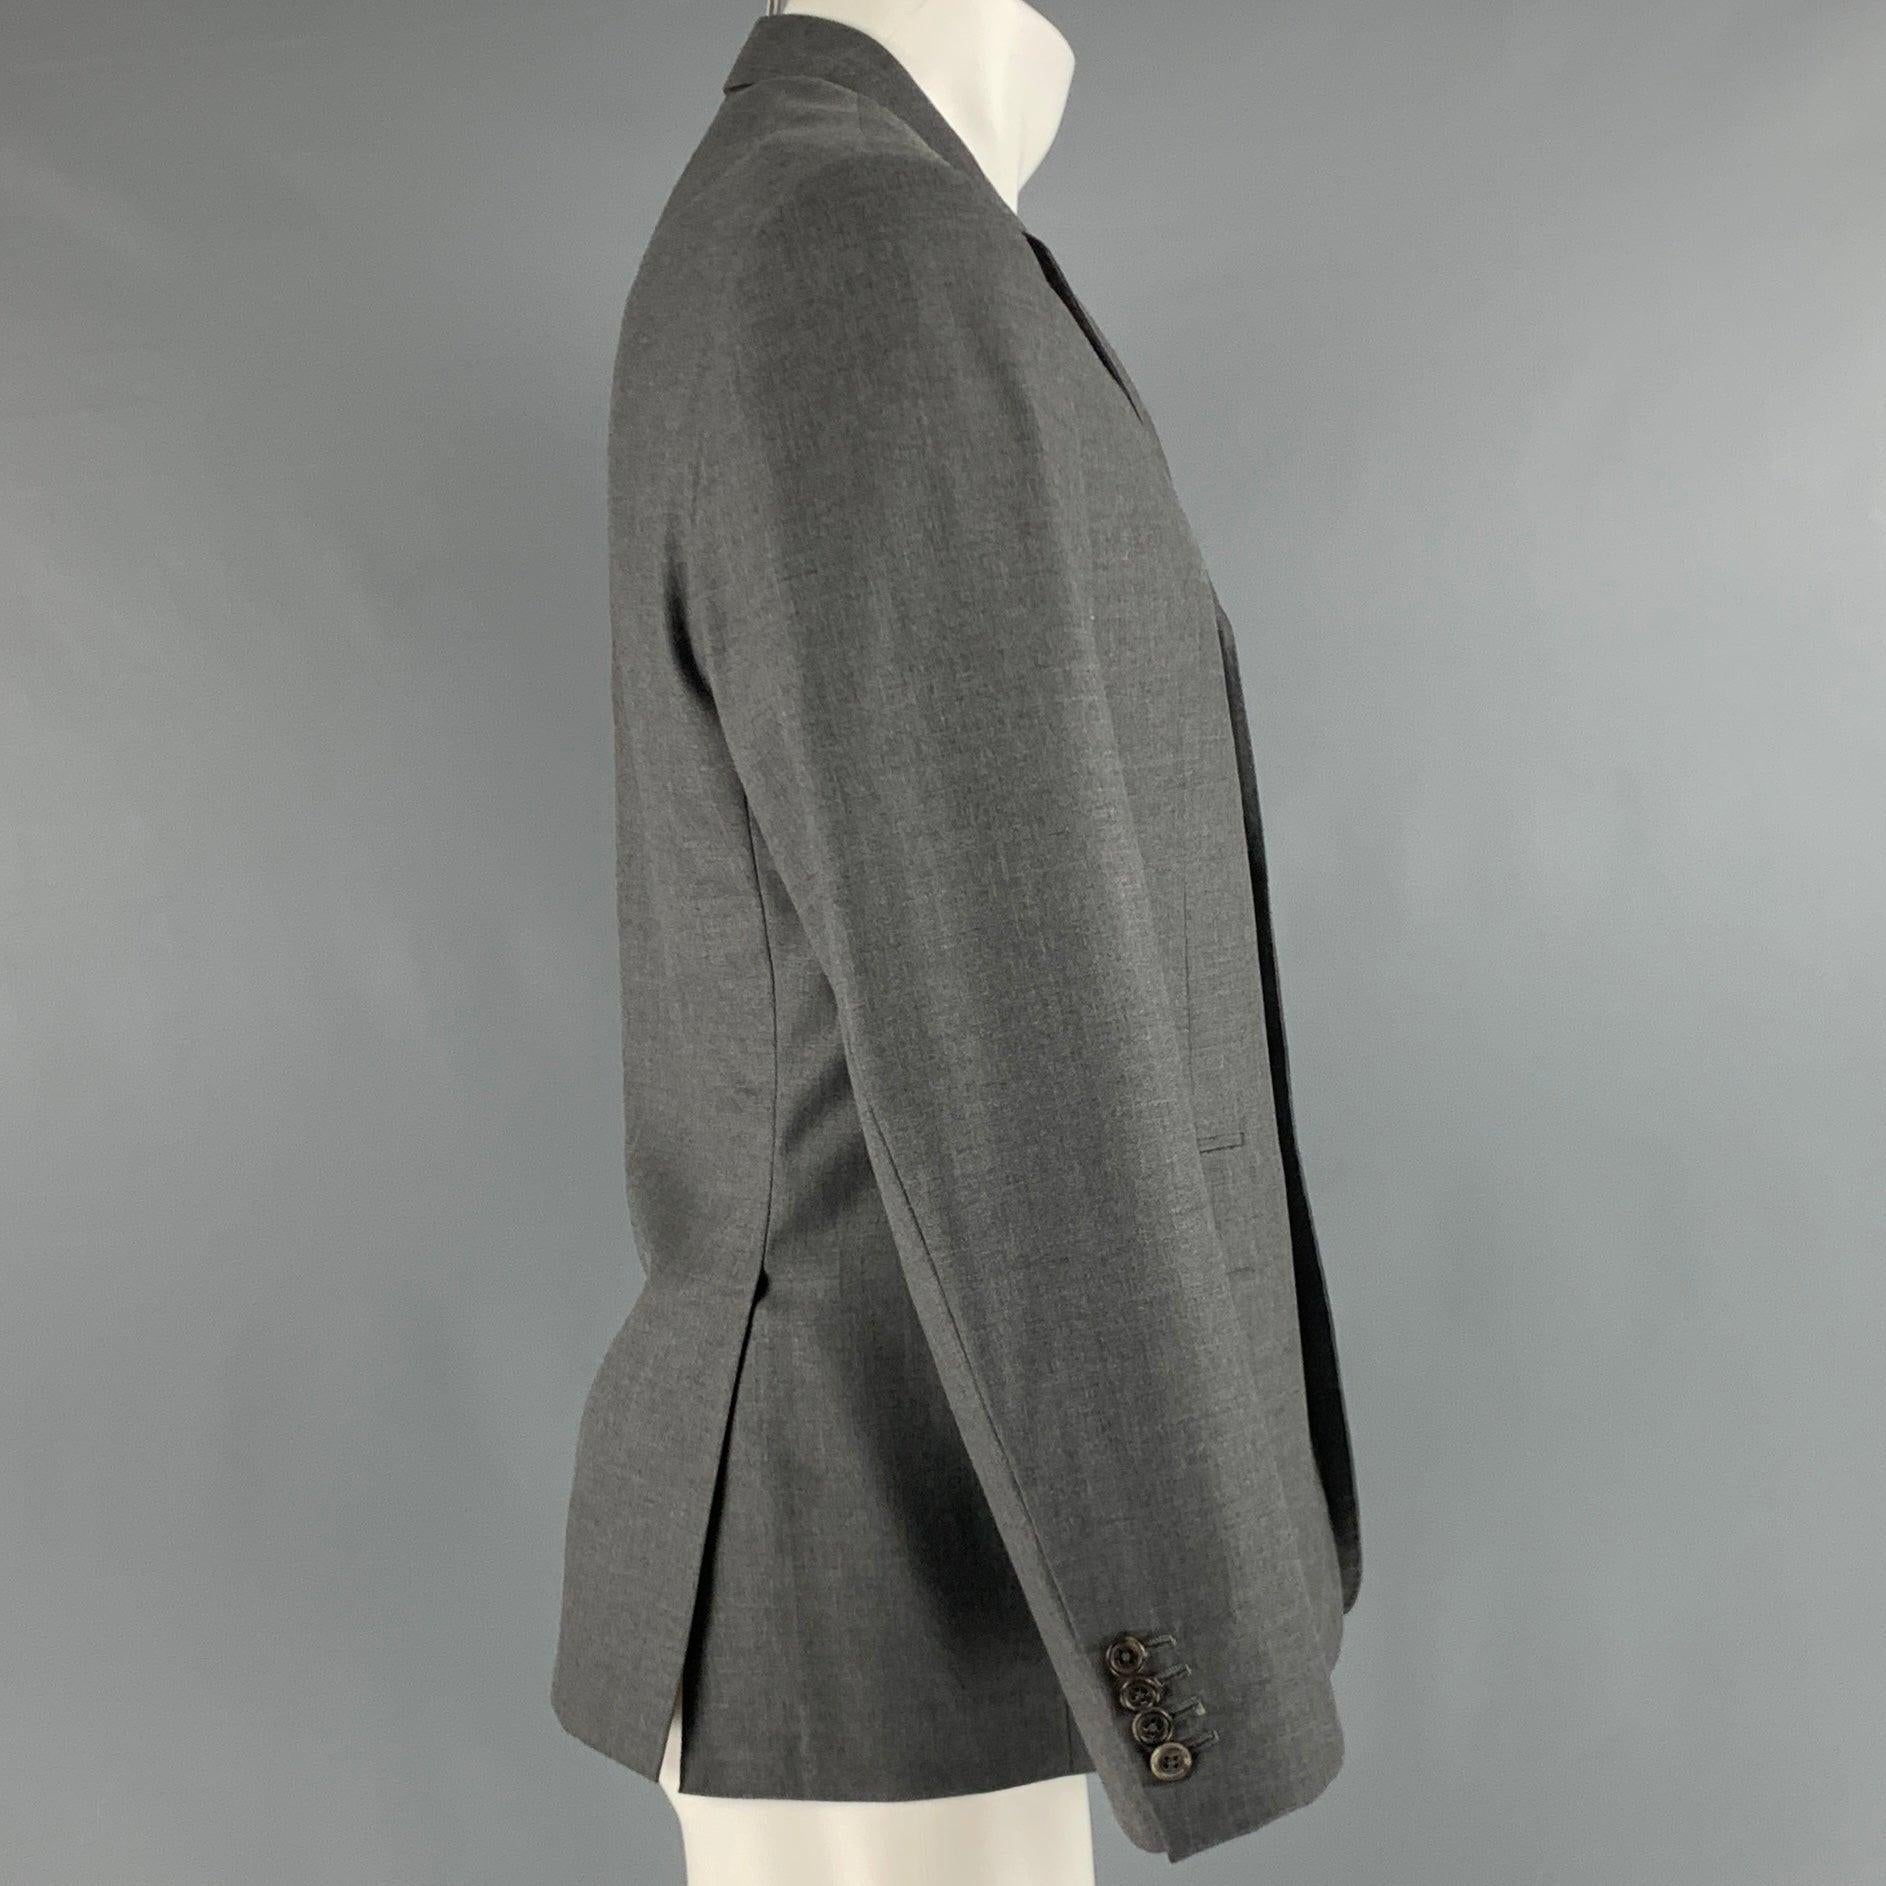 THOM BROWNE for BARNEYS sport coat
in a grey tweed featuring notch lapel, double vented back, and three button closure. Handmade in USA.Very Good Pre-Owned Condition. Minor signs of wear. 

Marked:   2 

Measurements: 
 
Shoulder: 16 inches Chest: